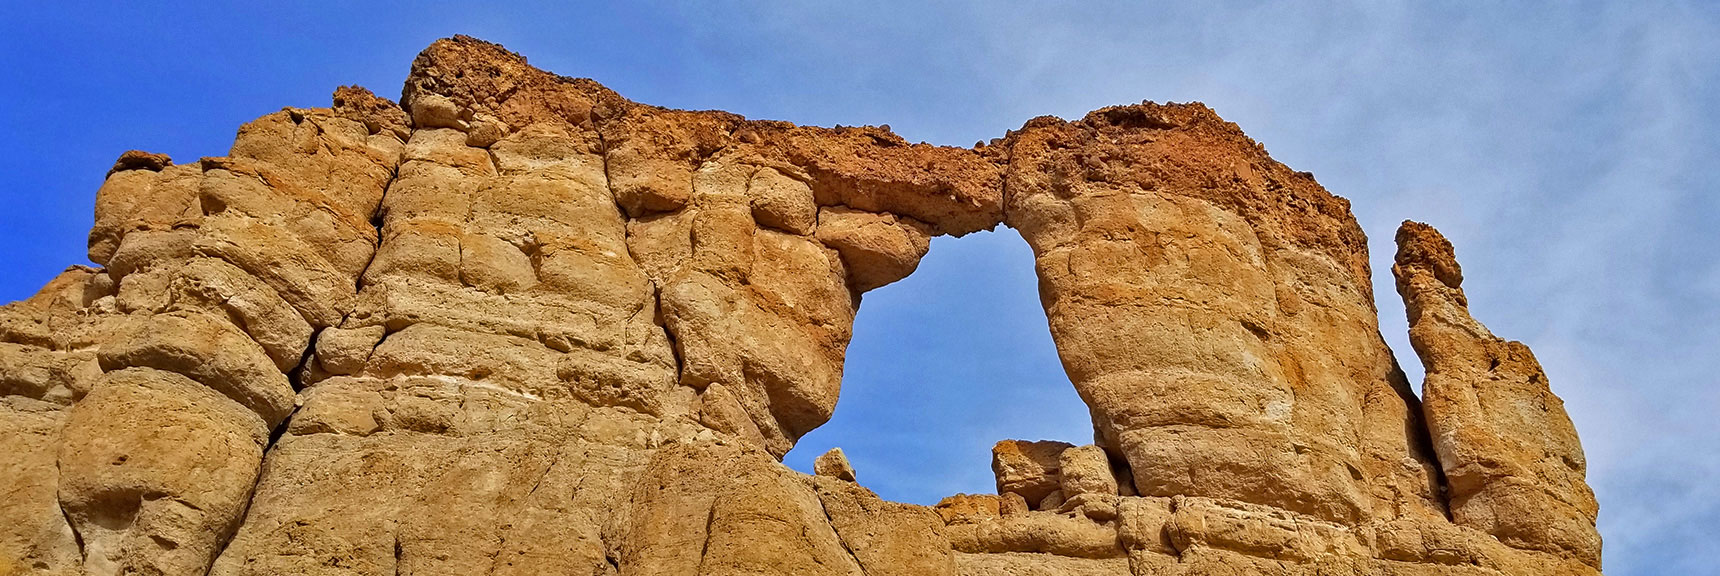 Liberty Bell Arch |Lake Mead National Recreation Area, Nevada